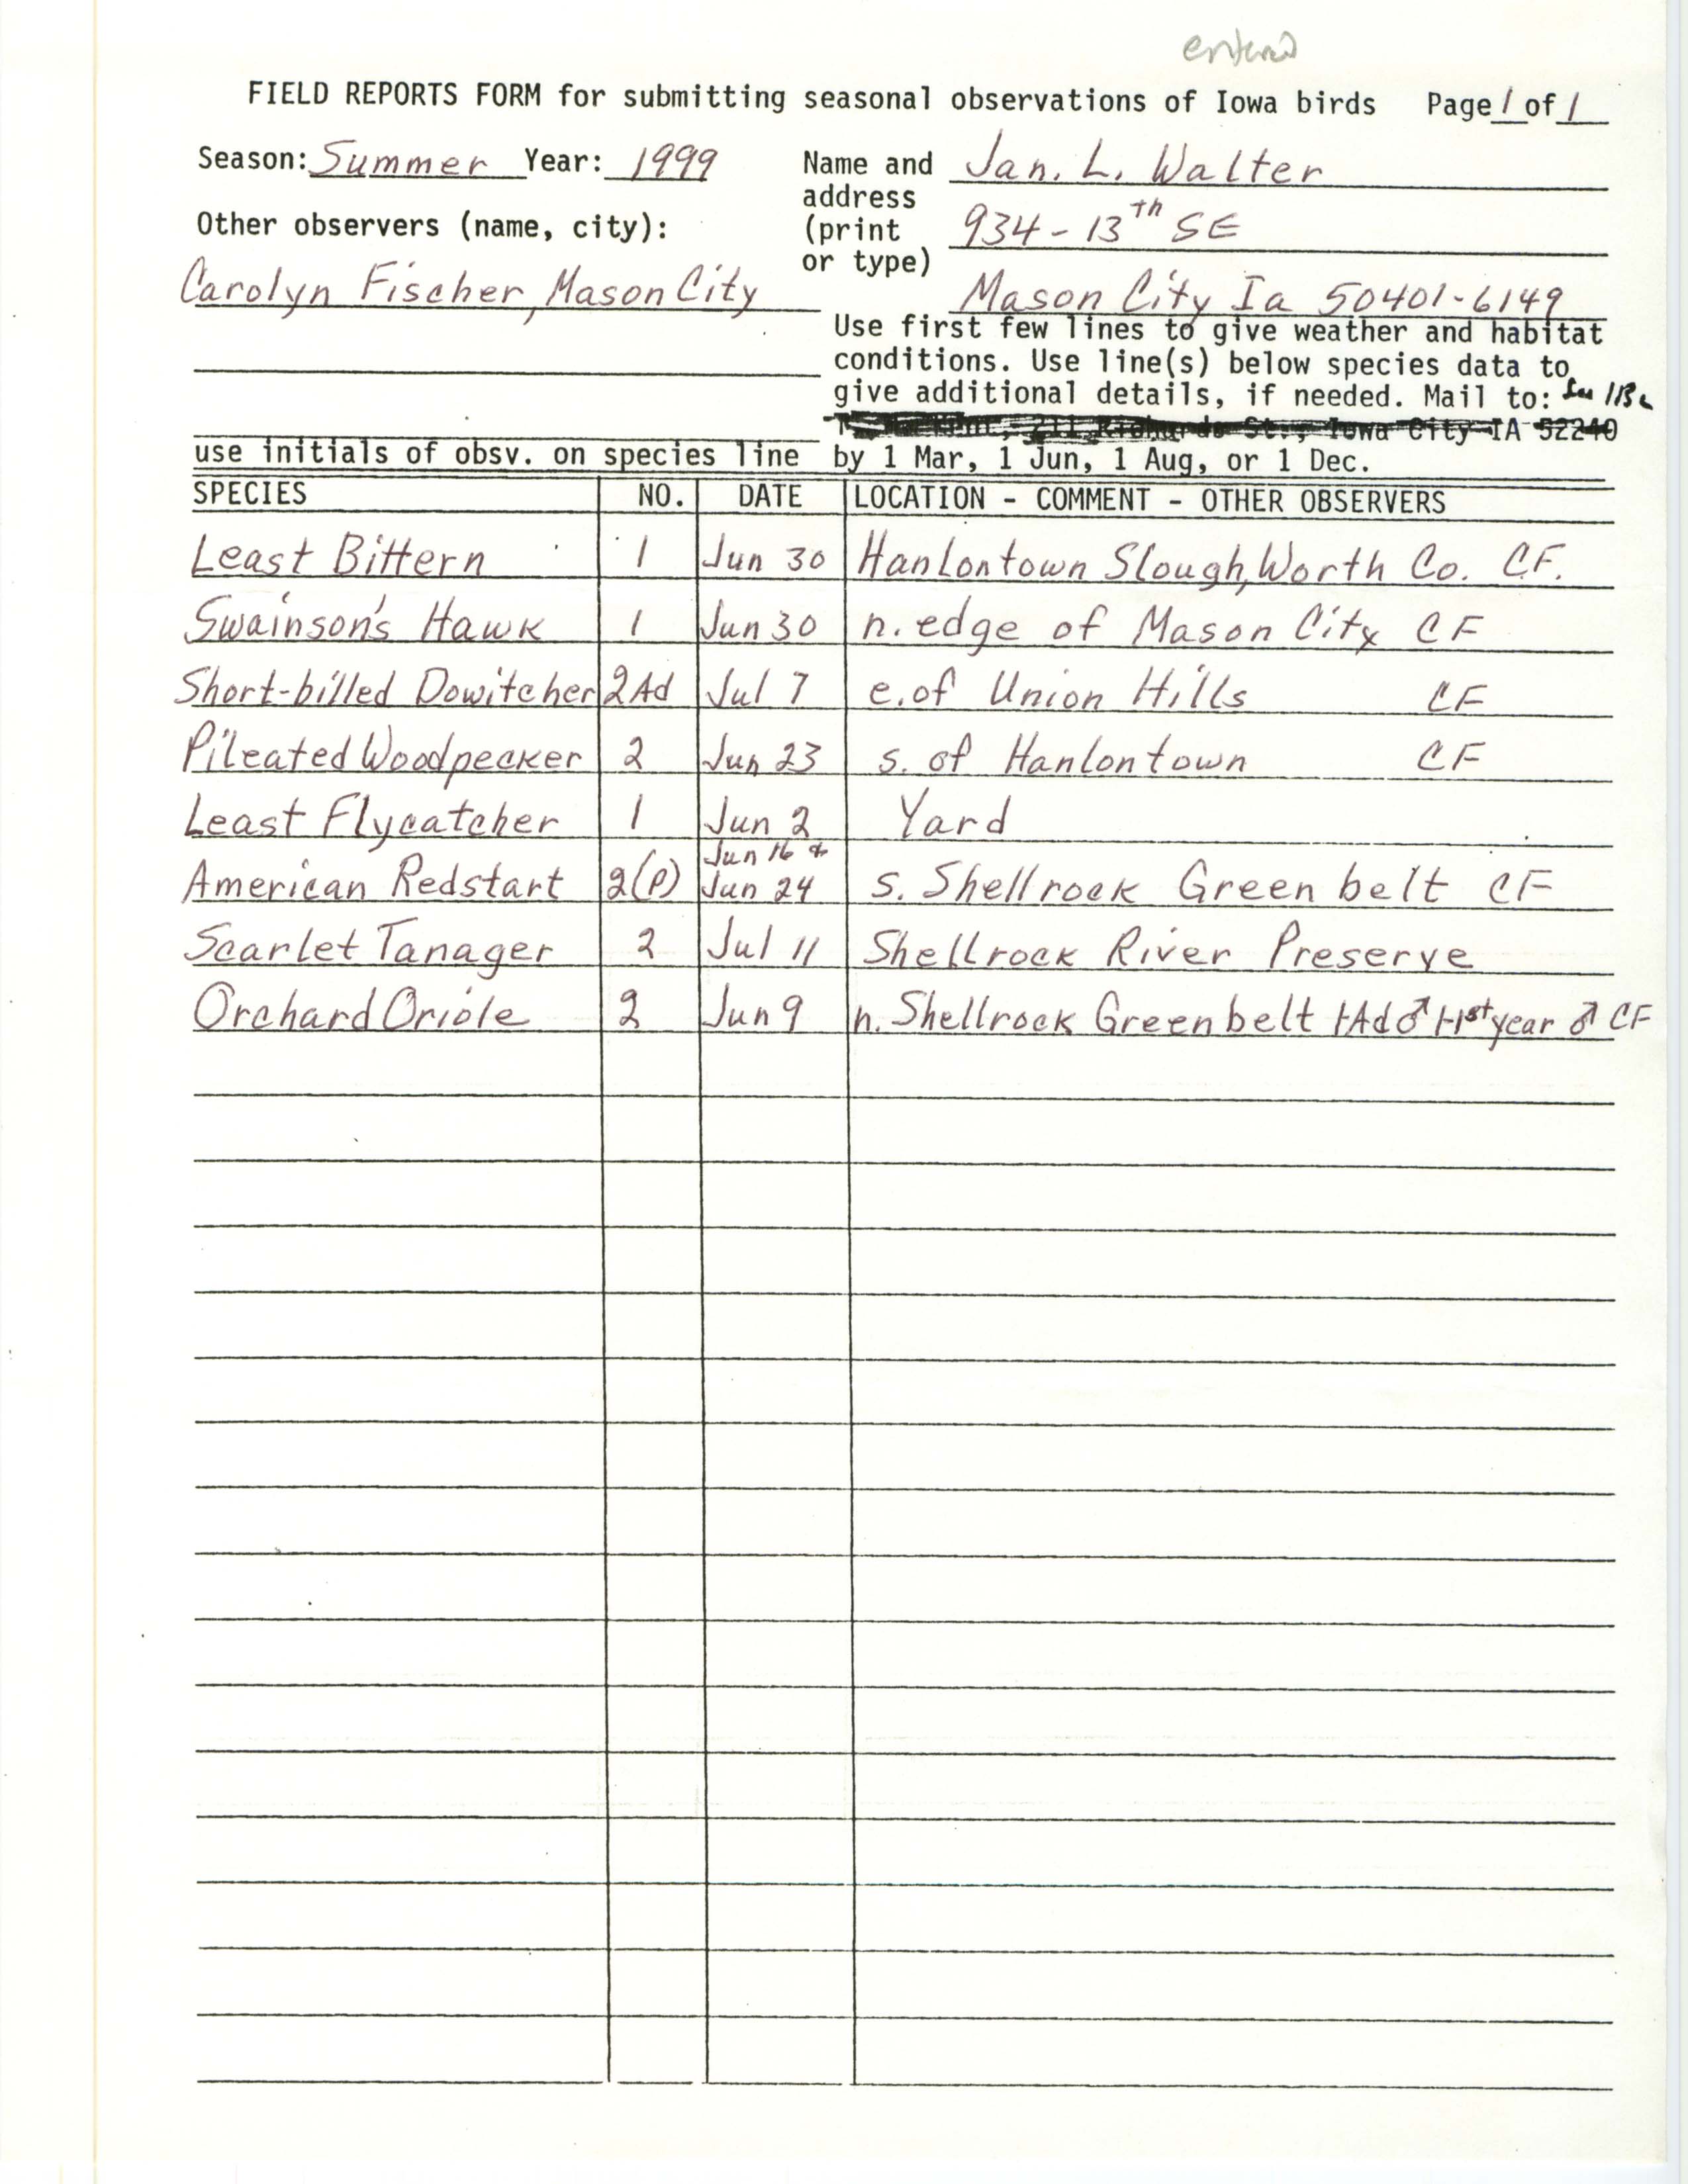 Field reports form for submitting seasonal observations of Iowa birds, summer 1999, Jan Walter